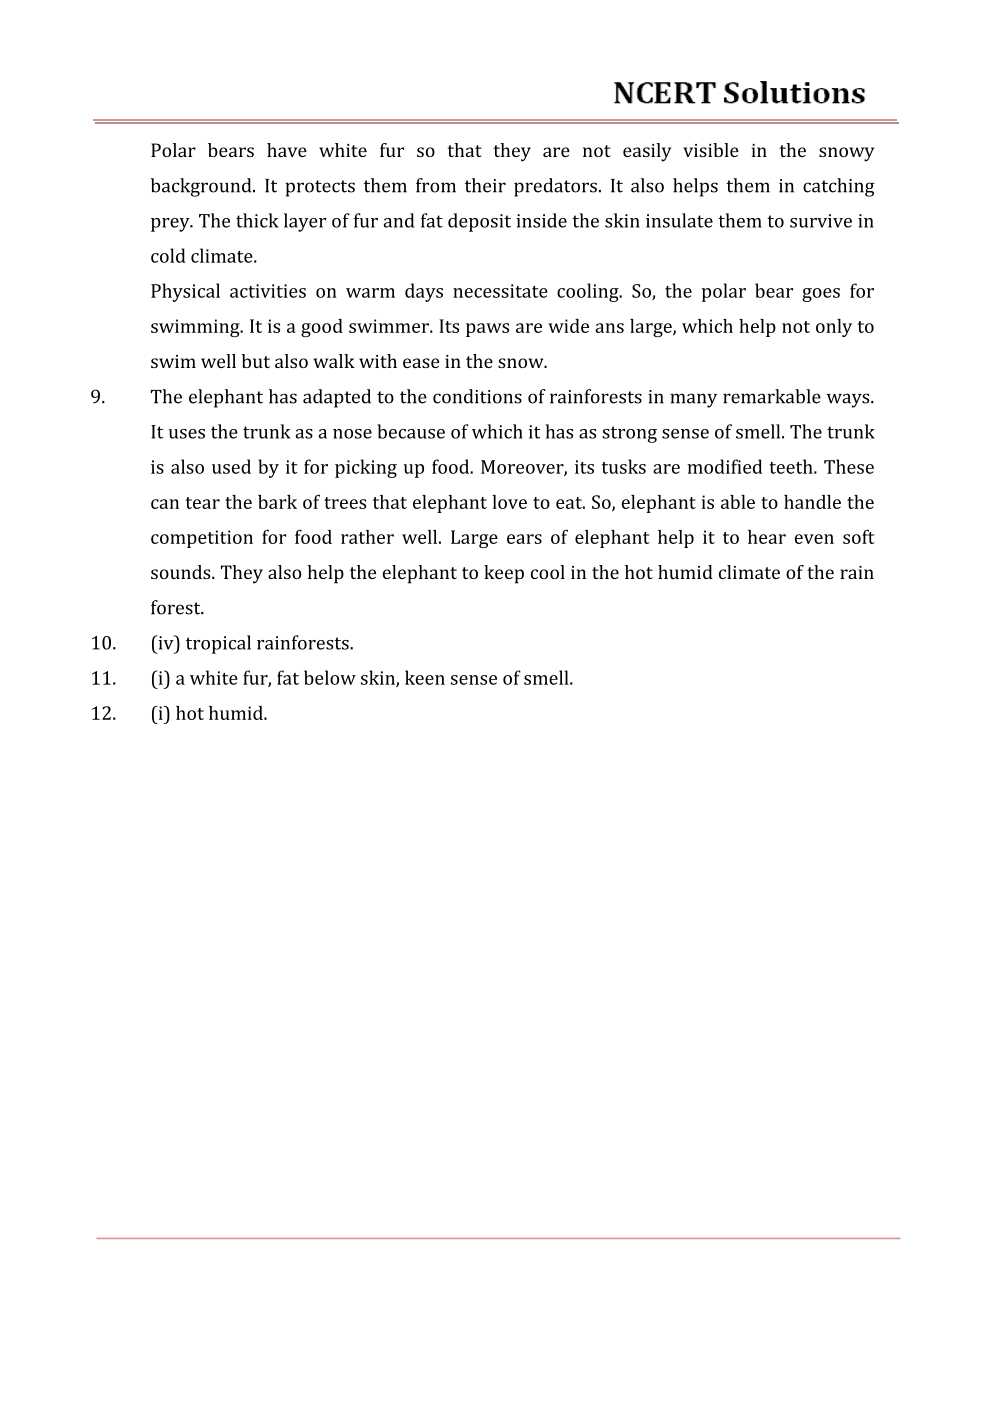 NCERT Solutions For Class 7 science Chapter 7 Weather, Climate, and Adaptations of Animals to Climate